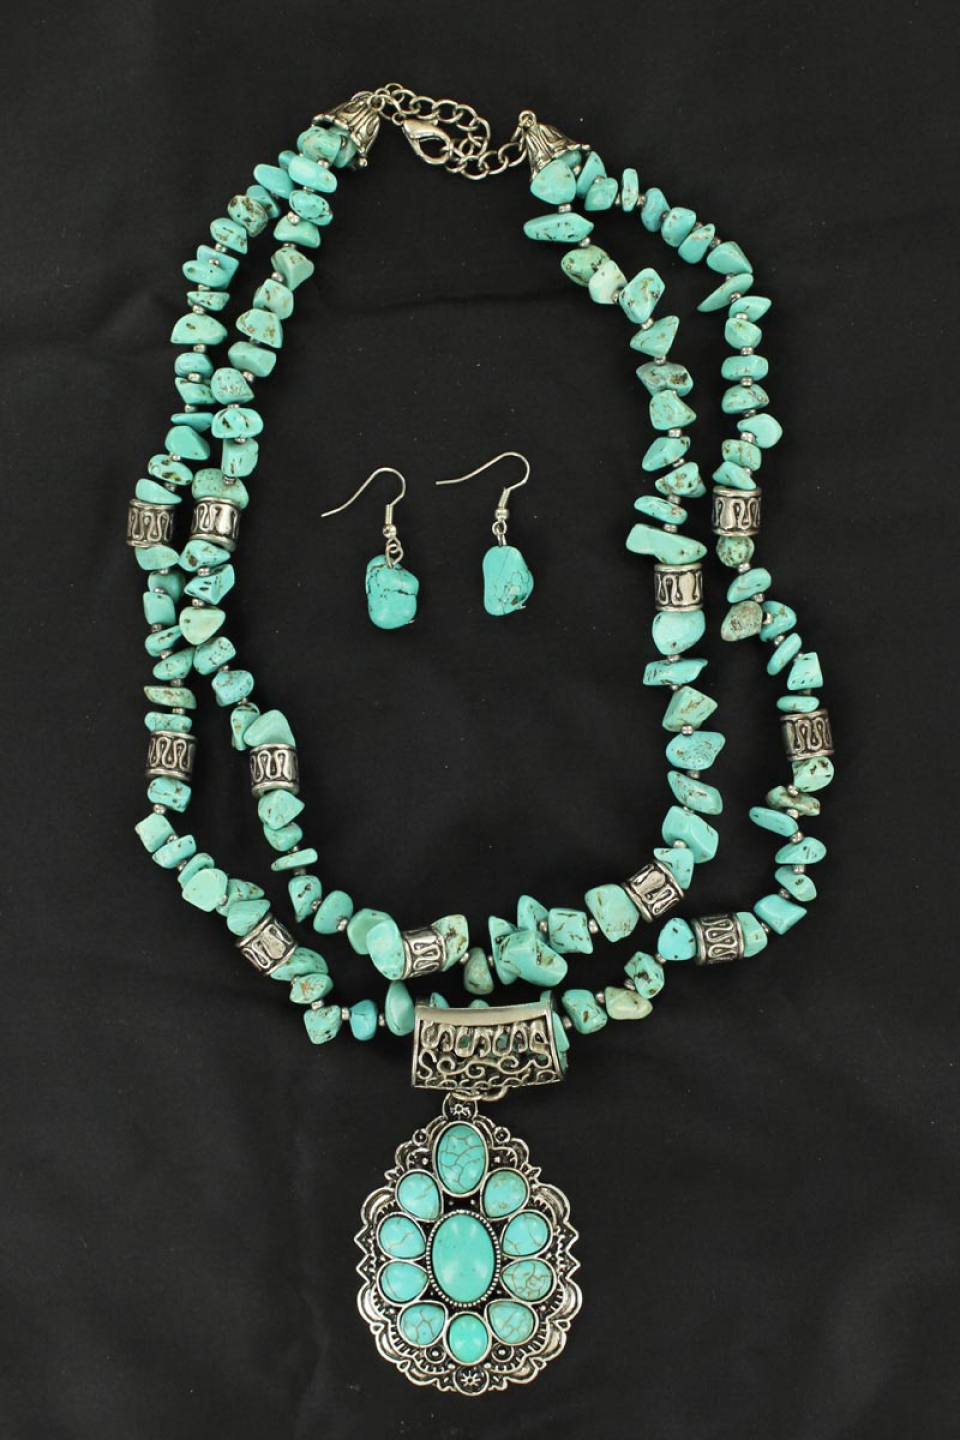 Teardrop Turquoise Necklace - Cattle Kate